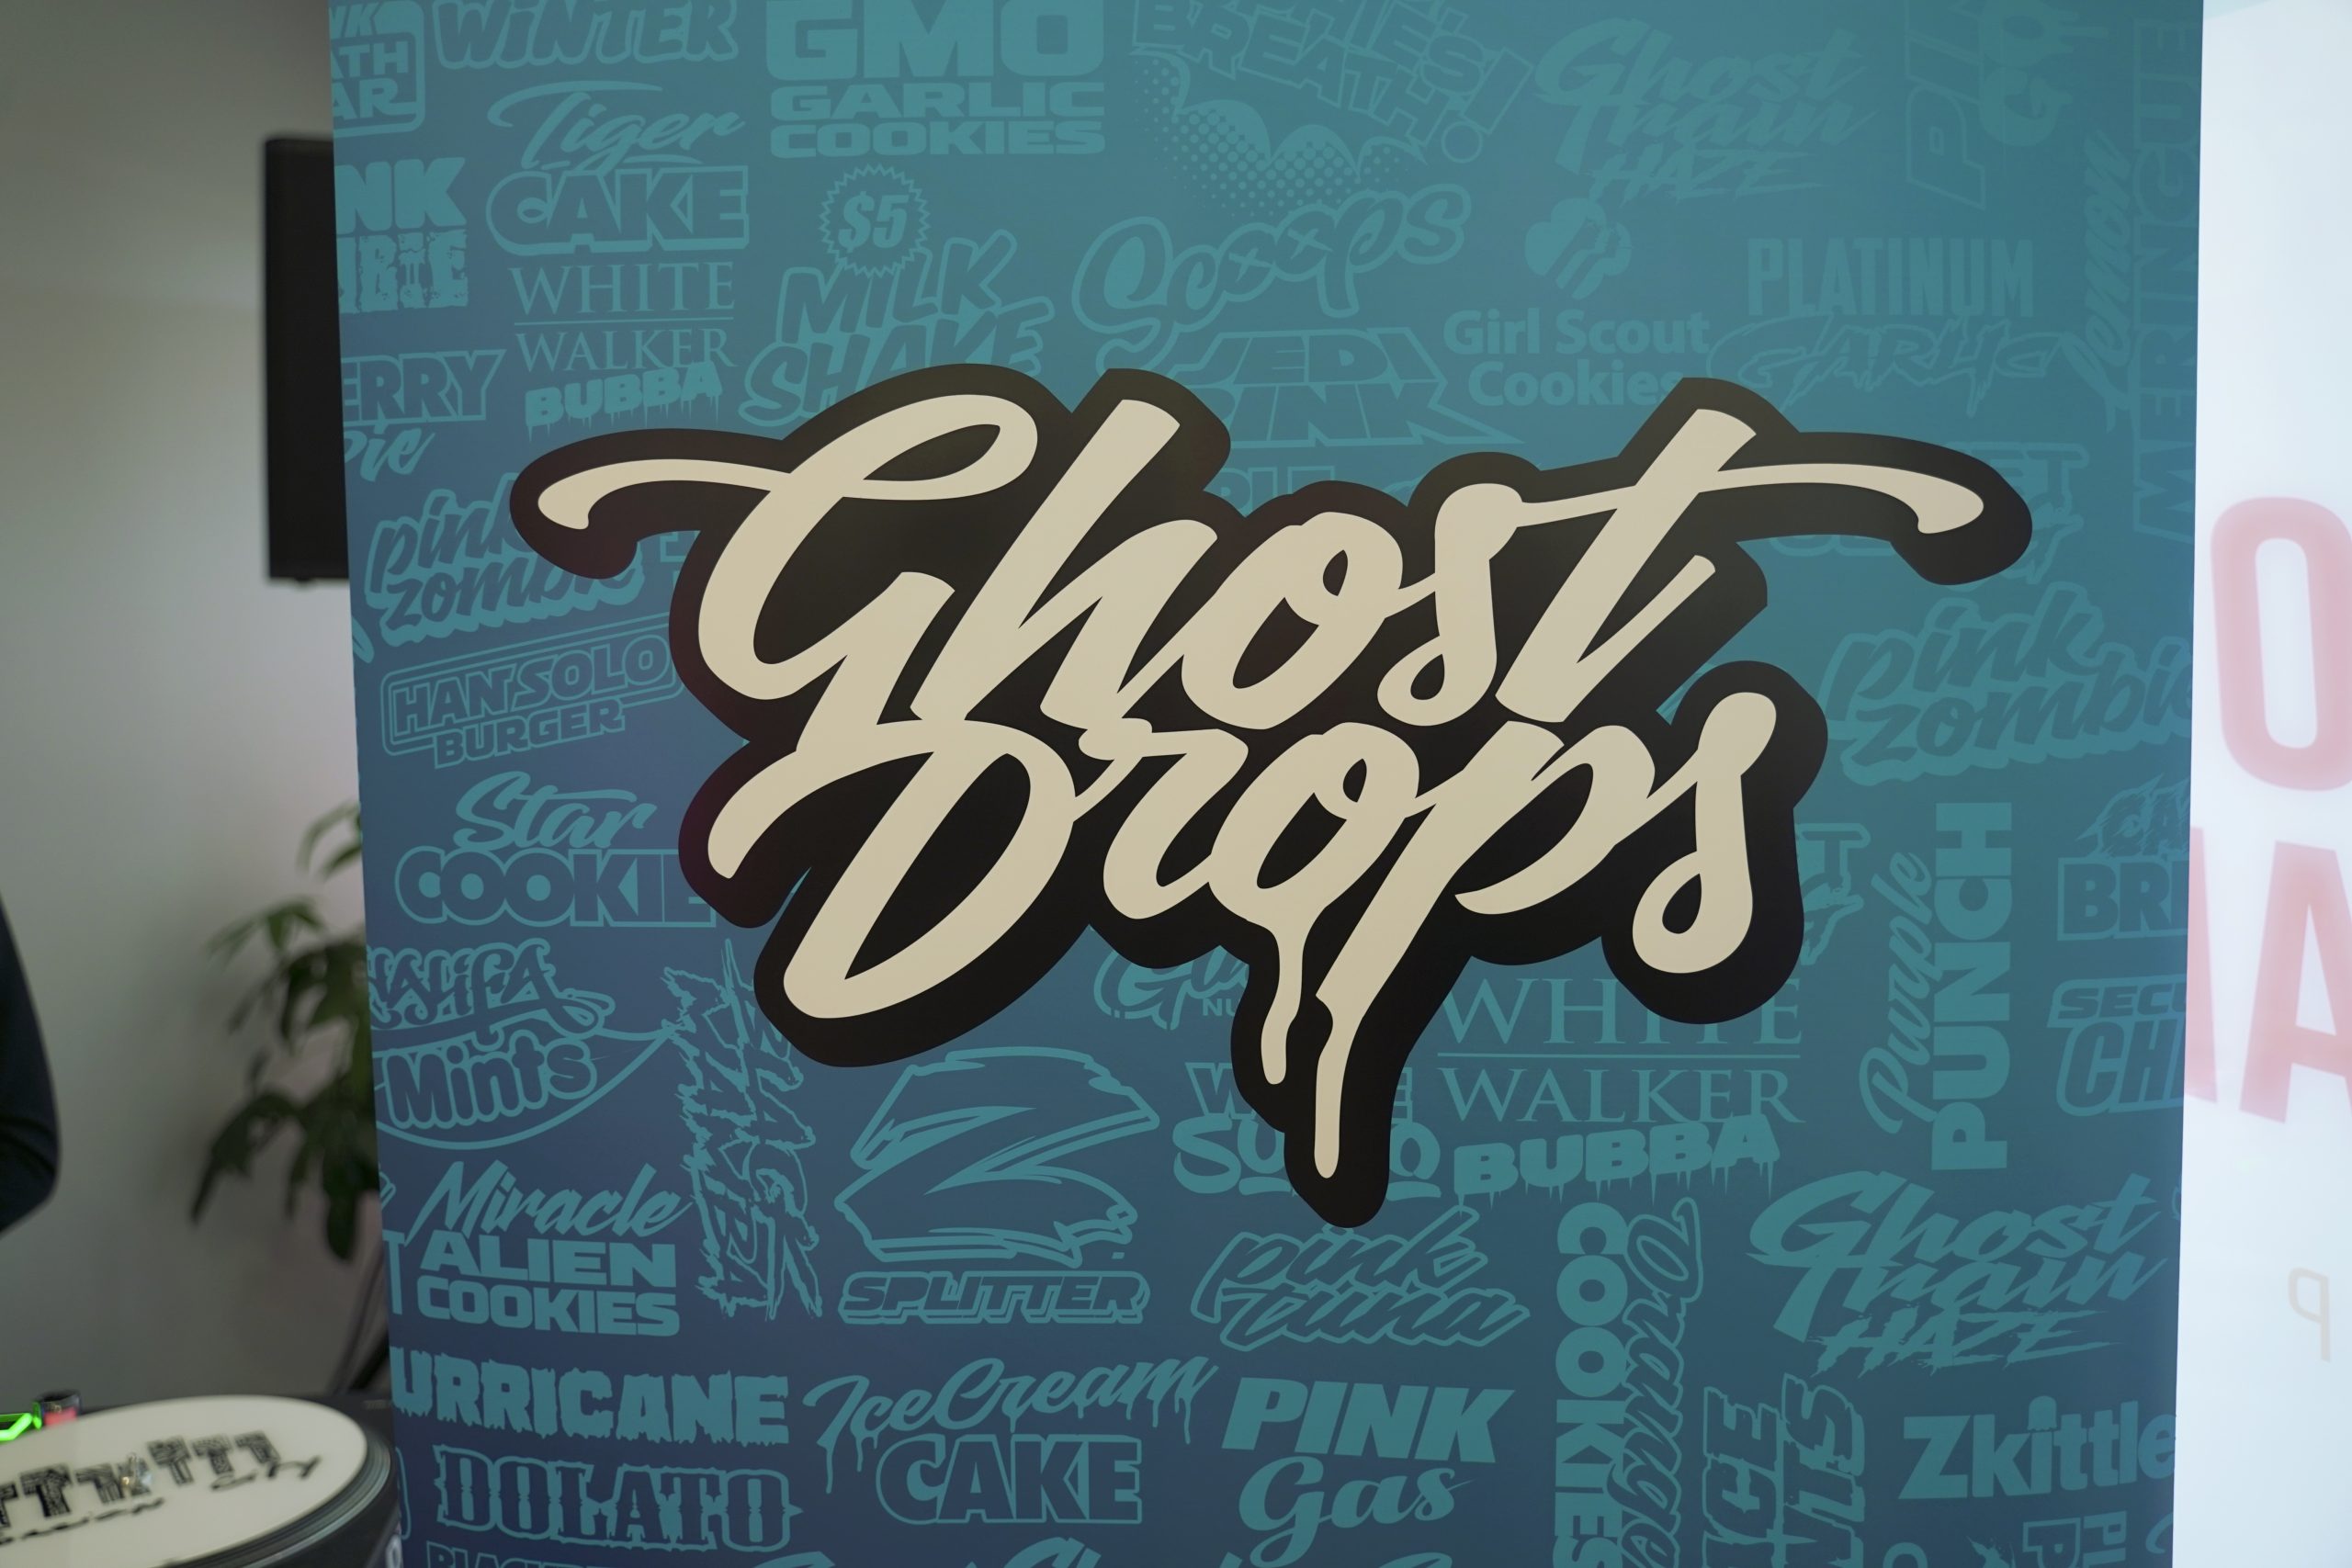 KOTD Founder Organik Launches New Cannabis Brand ‘Ghost Drops’